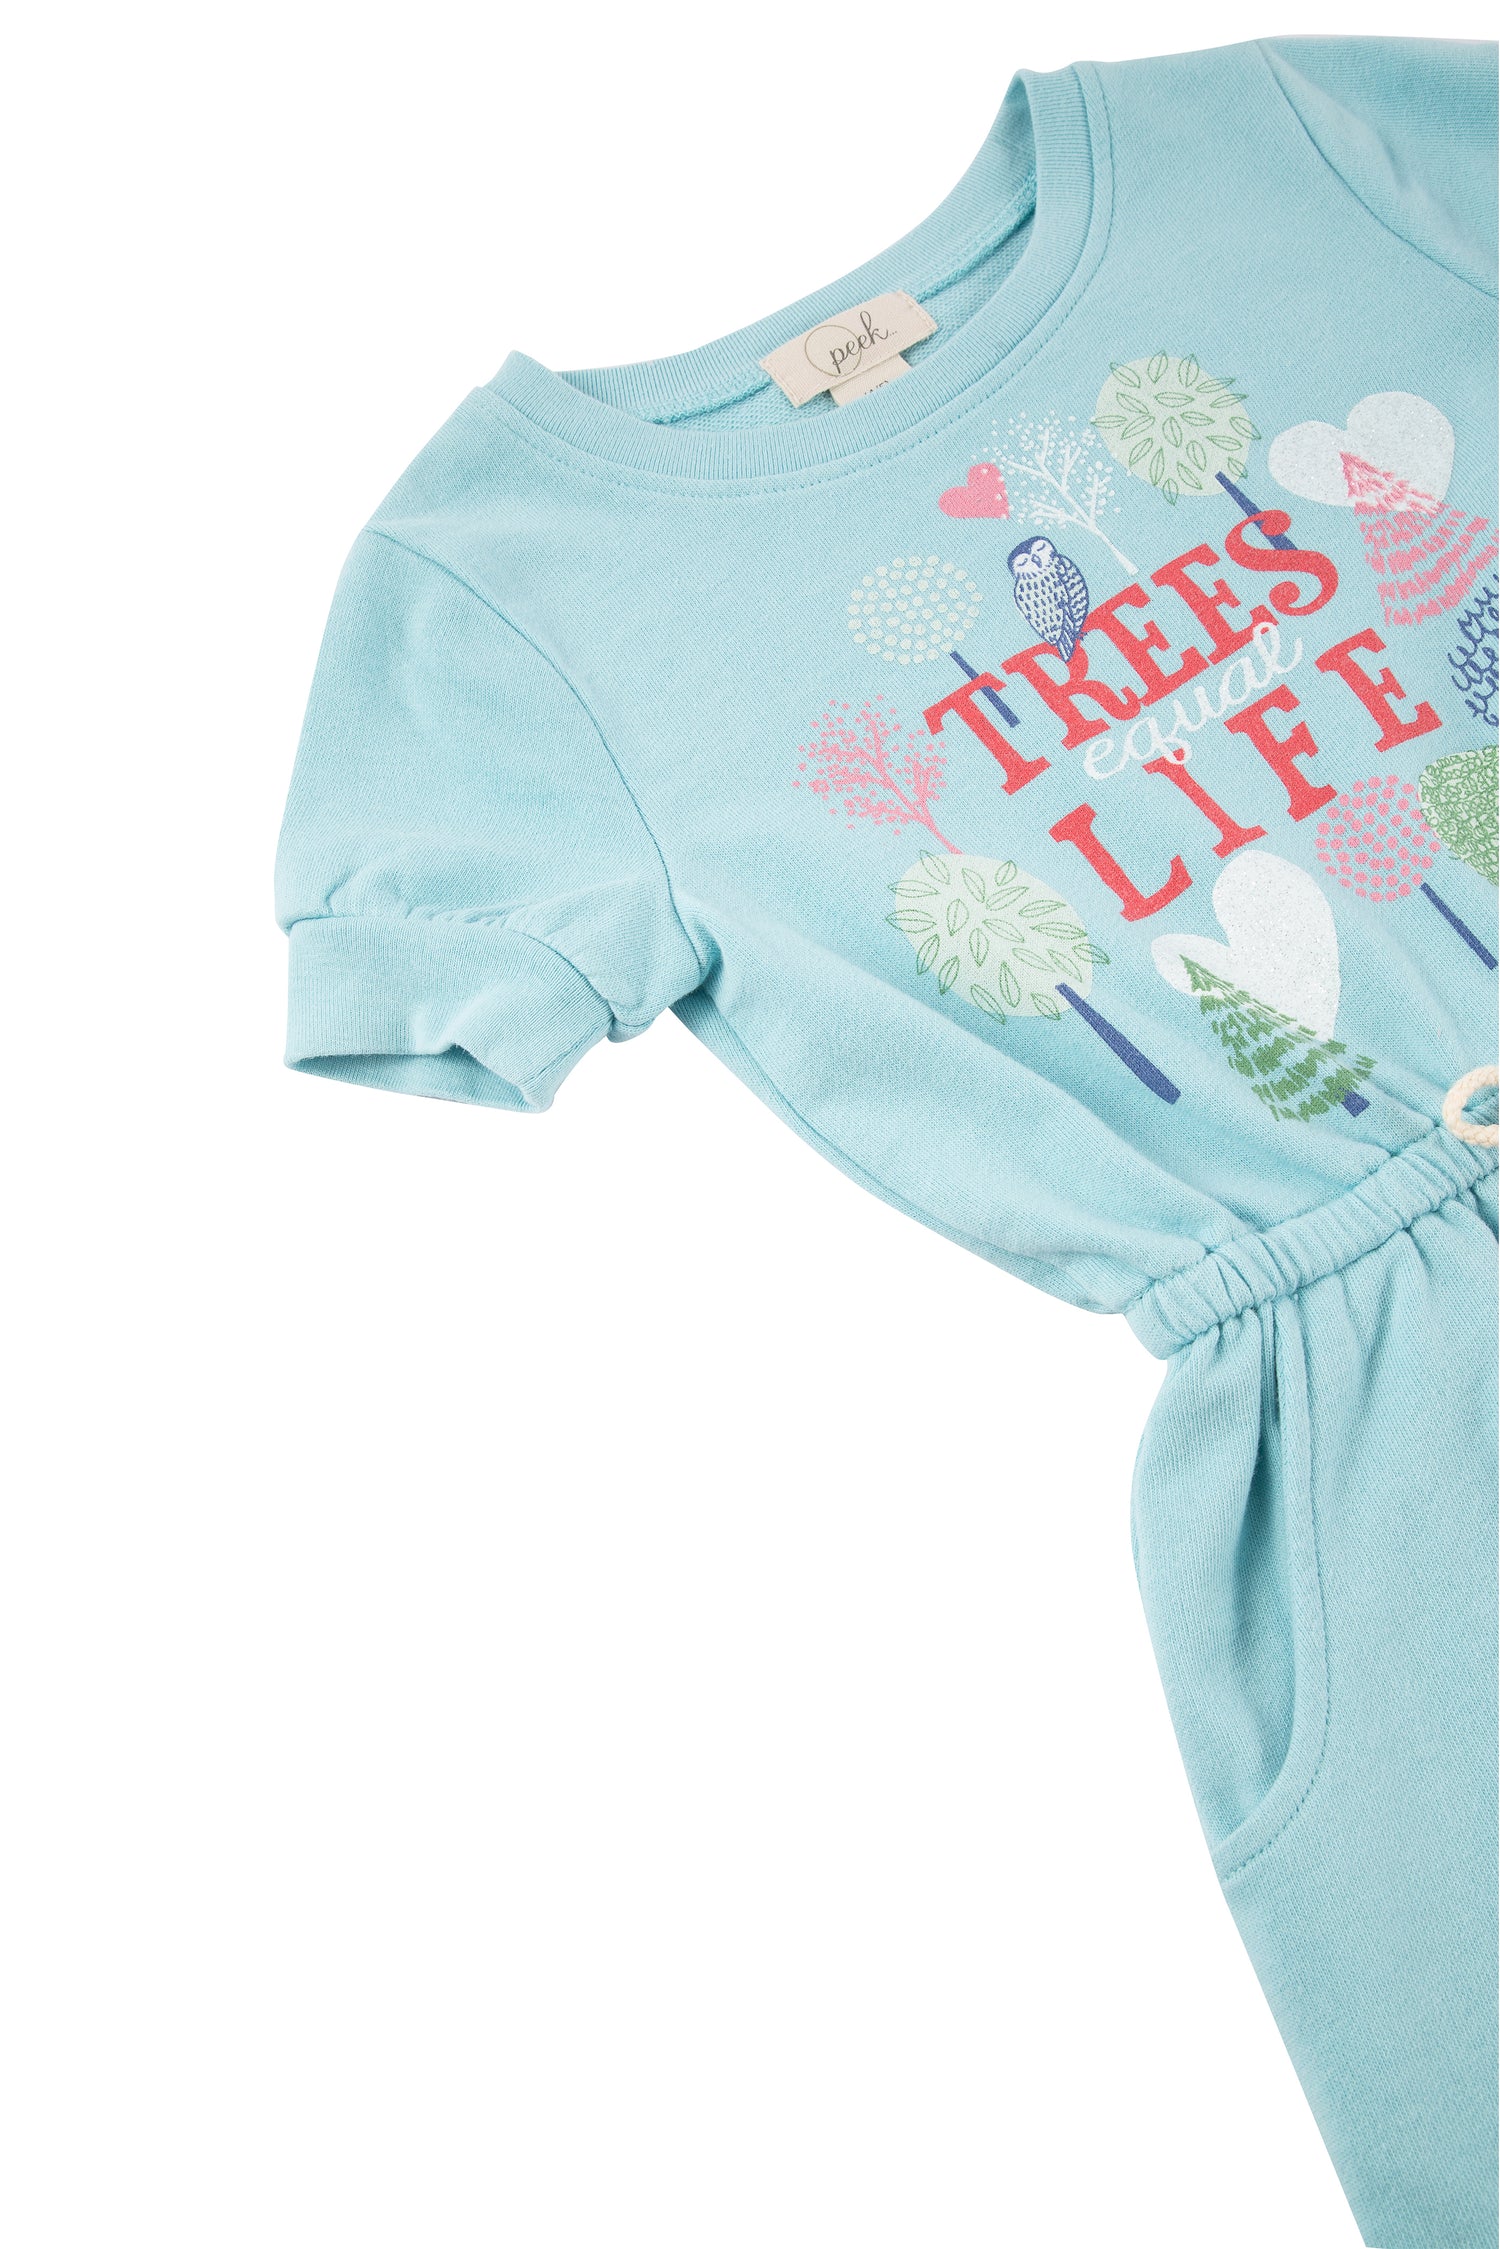 Close up of pocketed baby blue dress with illustrated owl, trees & "trees equal life" text